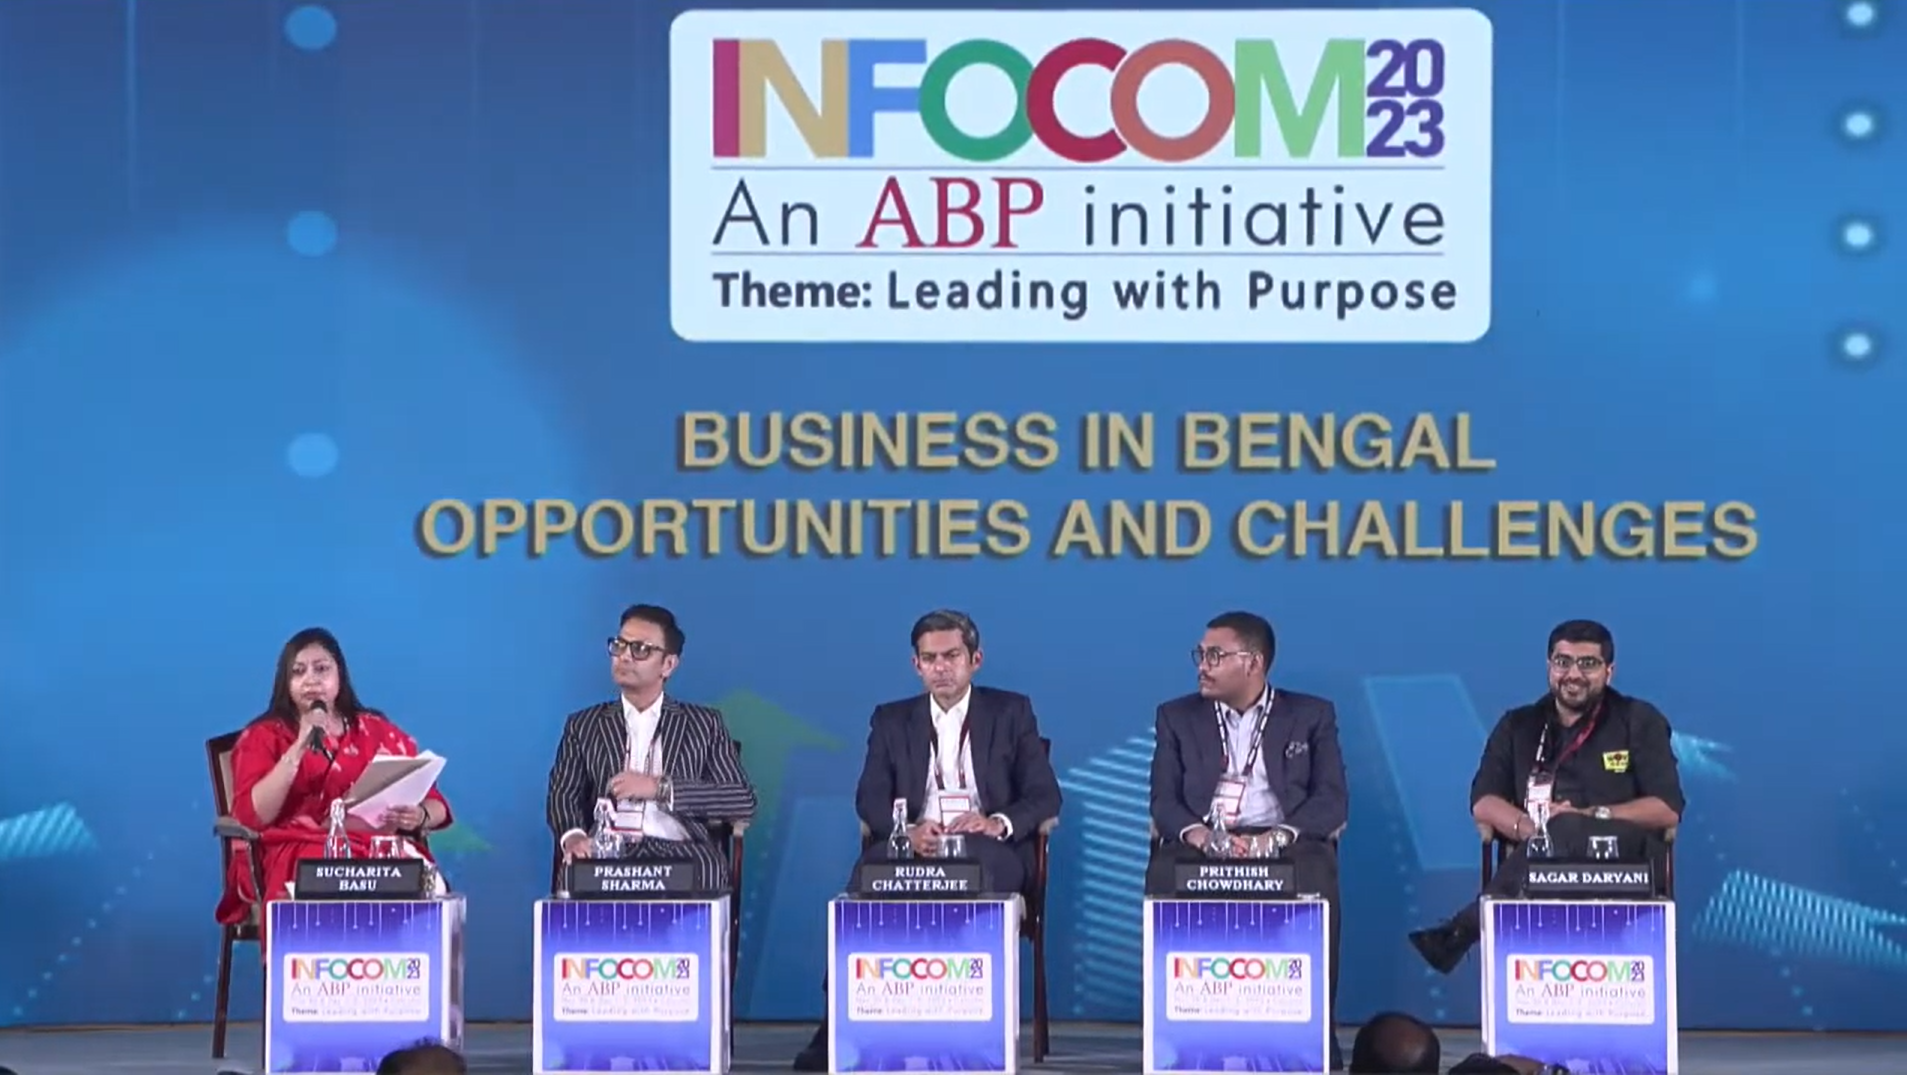 Our Partner, Sucharita Basu was the interlocutor for the Session “Doing Business in Bengal - Opportunities & Challenges” at the ABP-INFOCOM 2023.